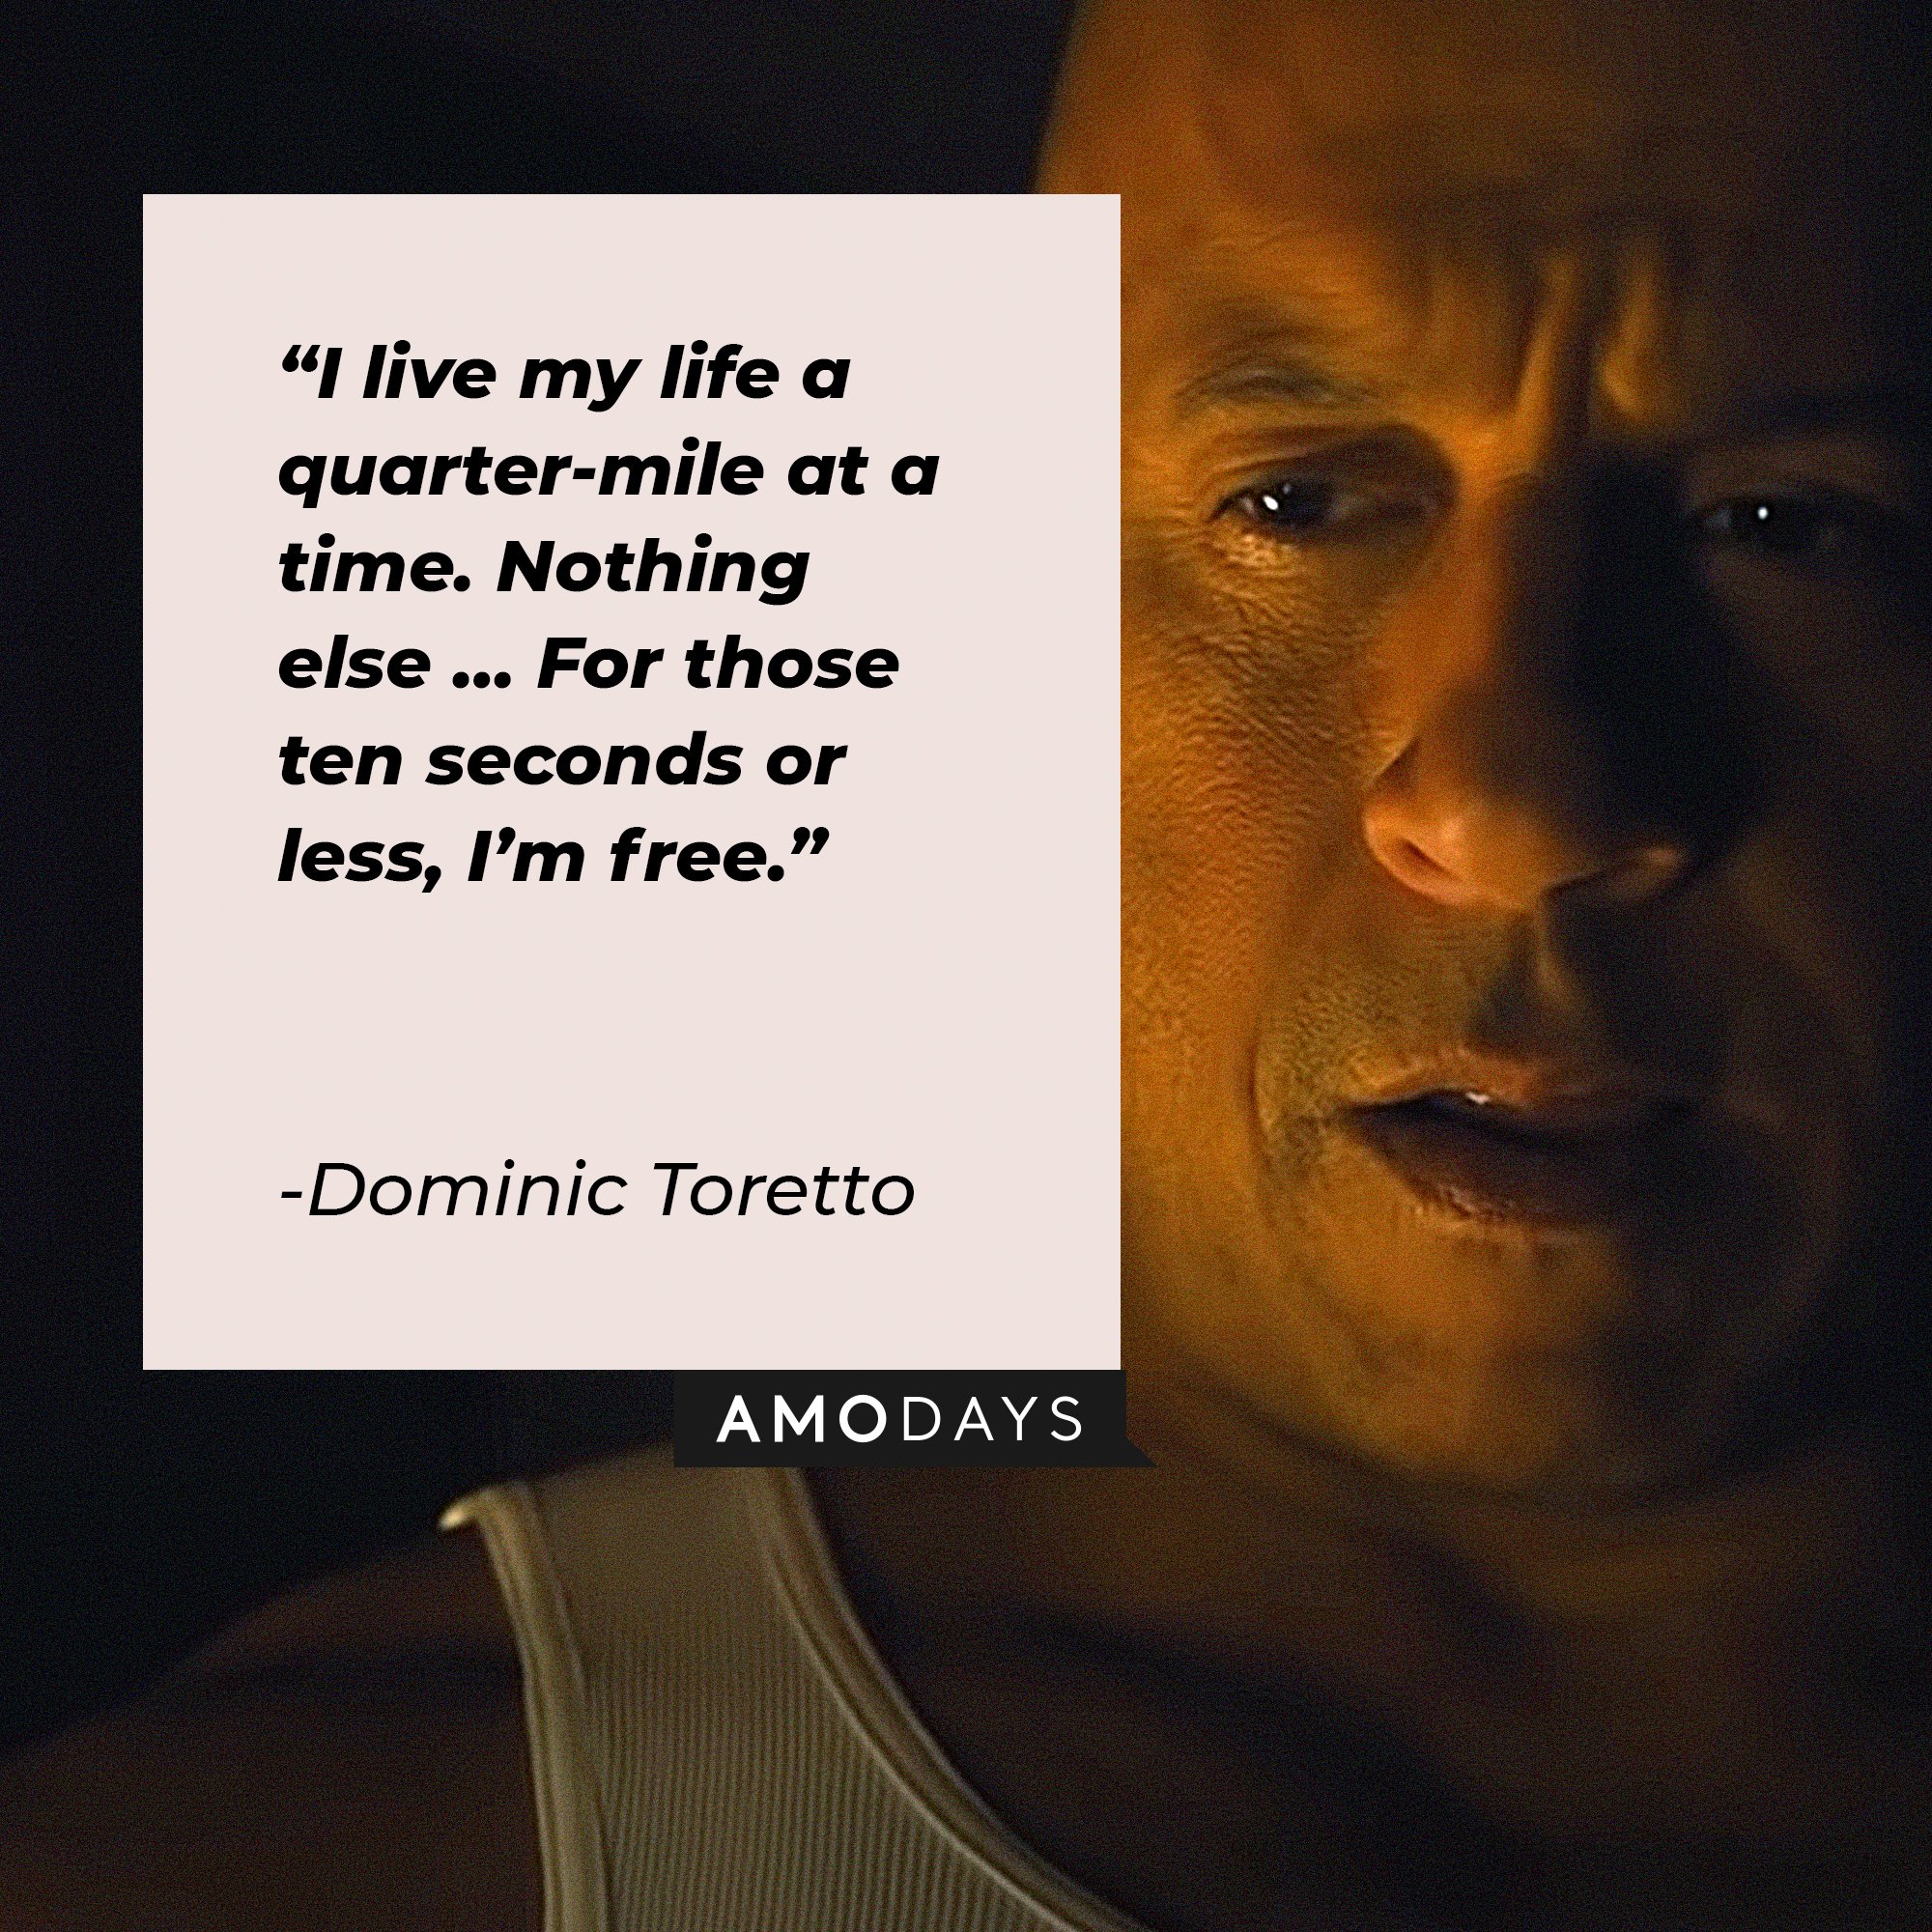 Dominic Toretto’s quote: "I live my life a quarter-mile at a time. Nothing else … For those ten seconds or less, I’m free.”  | Image: AmoDays